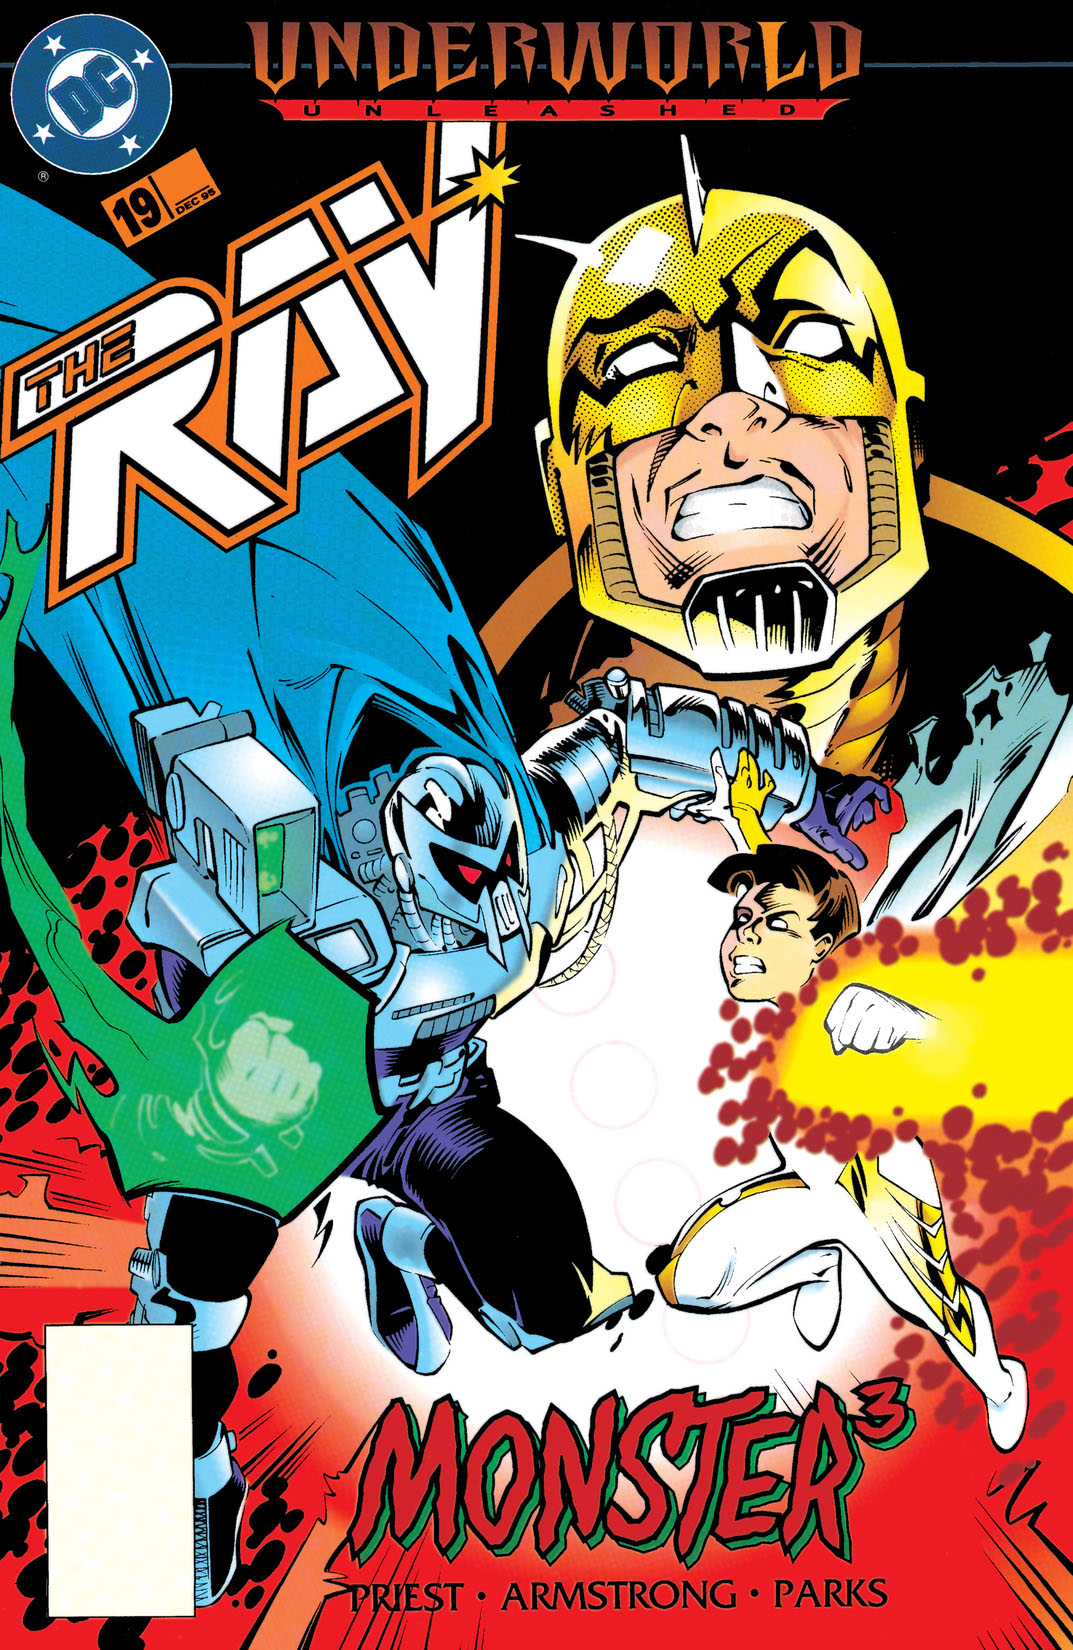 The Ray (1994-) #19 preview images